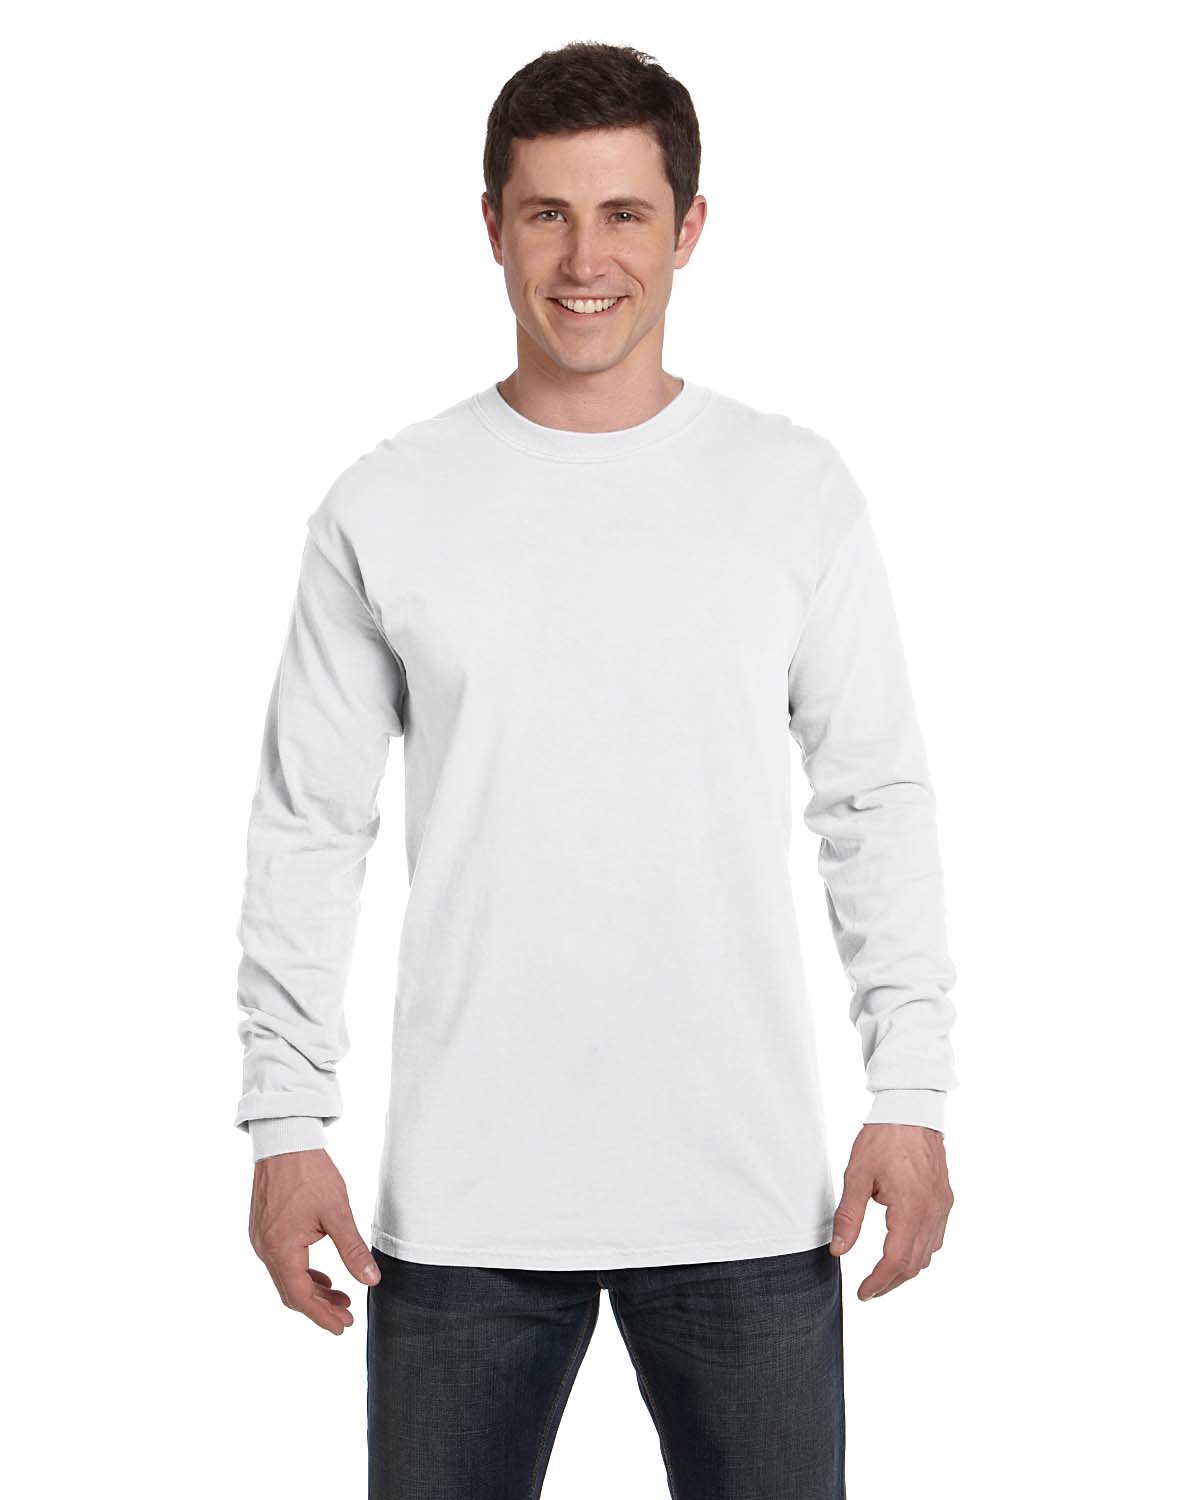 Comfort Colors Adult Long Sleeve Tee, Style 6014